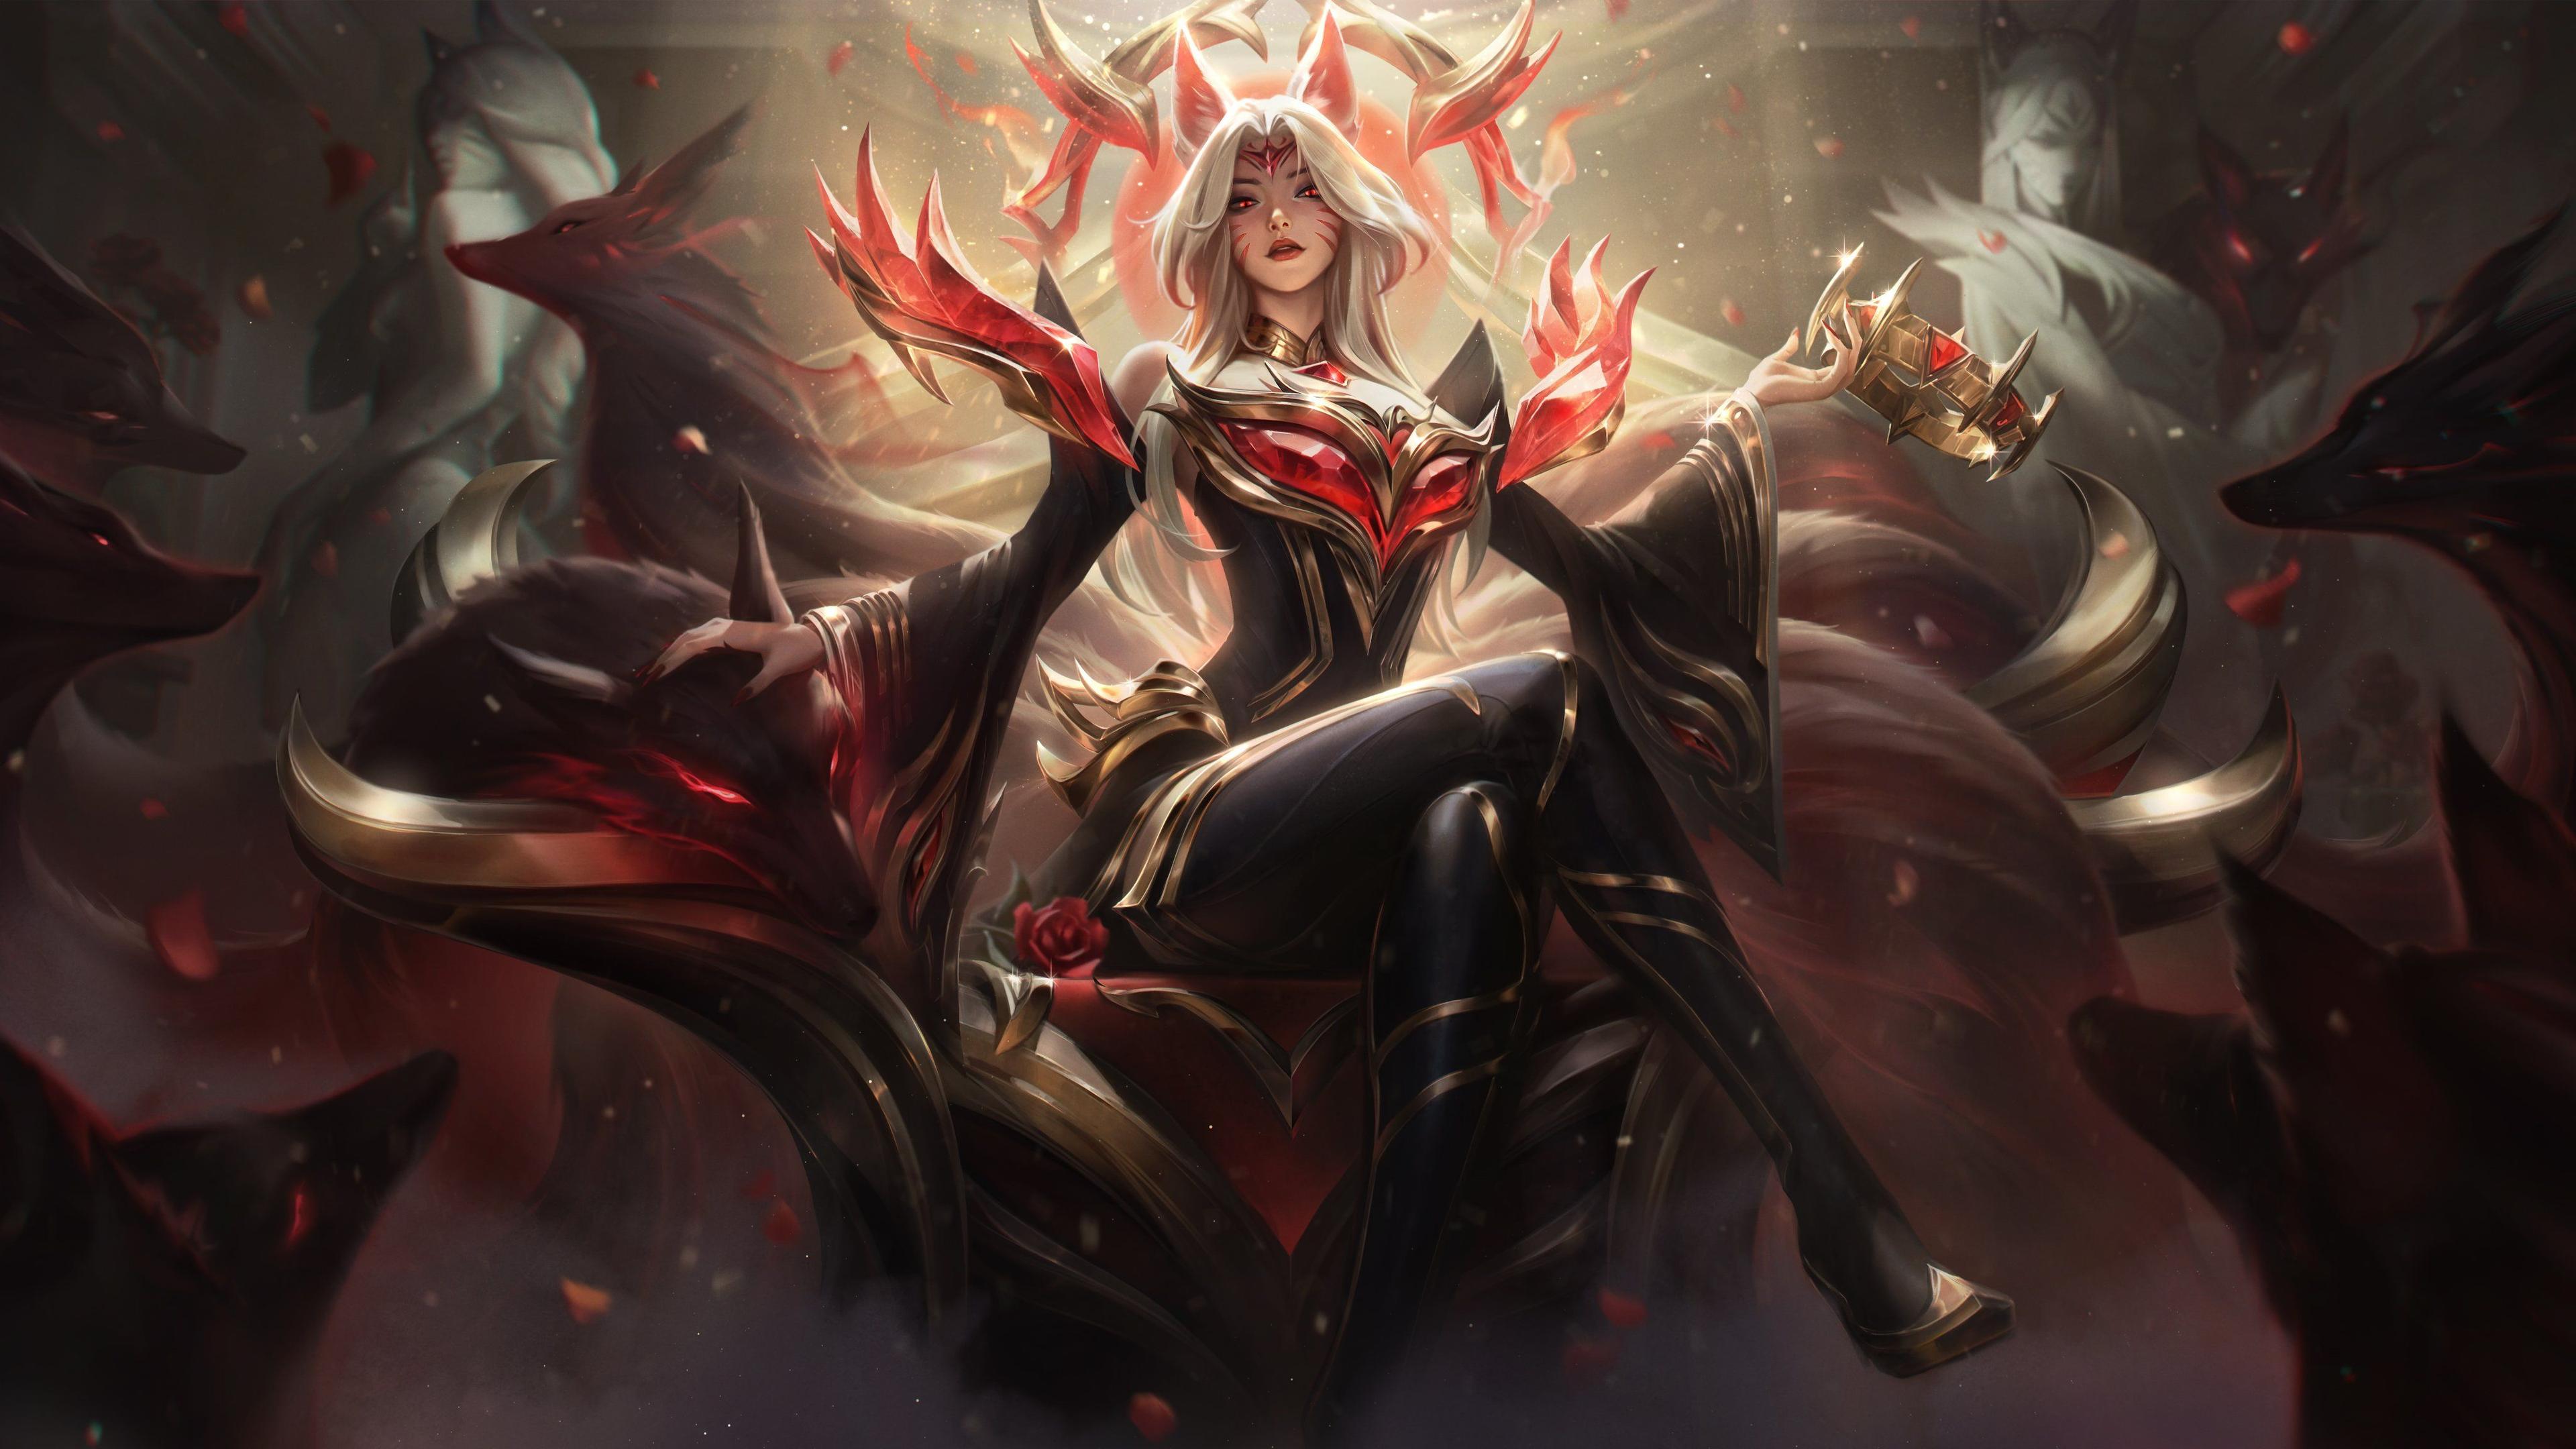 T1 Faker Ahri & LeBlanc Hall of Legends Skins Details – Release Date, Price, Splashes & In-Game Look